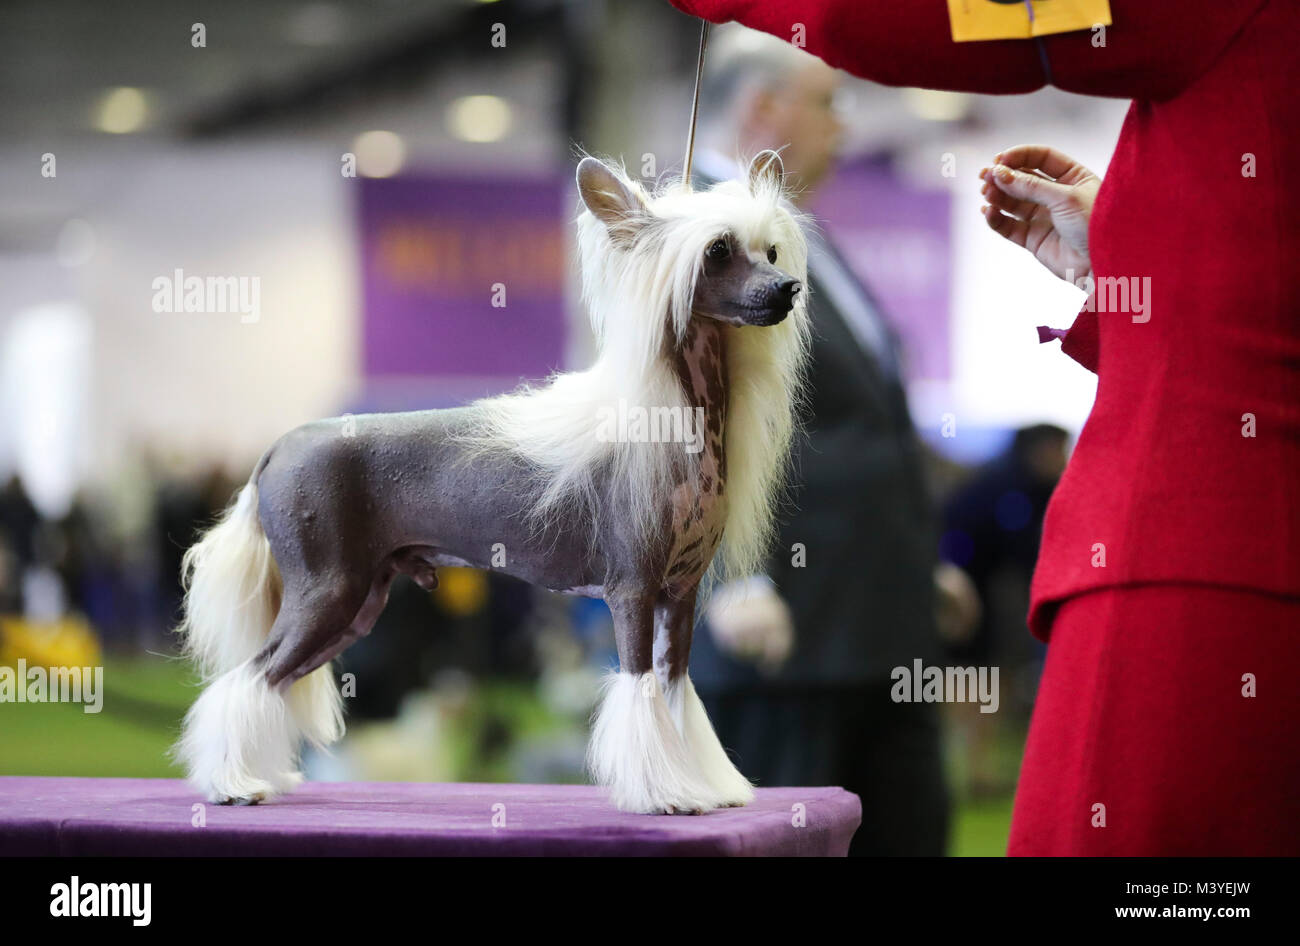 New York, USA. 12th Feb, 2018. A Chinese crested dog is seen during the 2018 Westminster Kennel Club Dog Show in New York, the United States, Feb. 12, 2018. Around 2800 dogs of over 200 breeds from all over the world participated in the show this year. Credit: Wang Ying/Xinhua/Alamy Live News Stock Photo